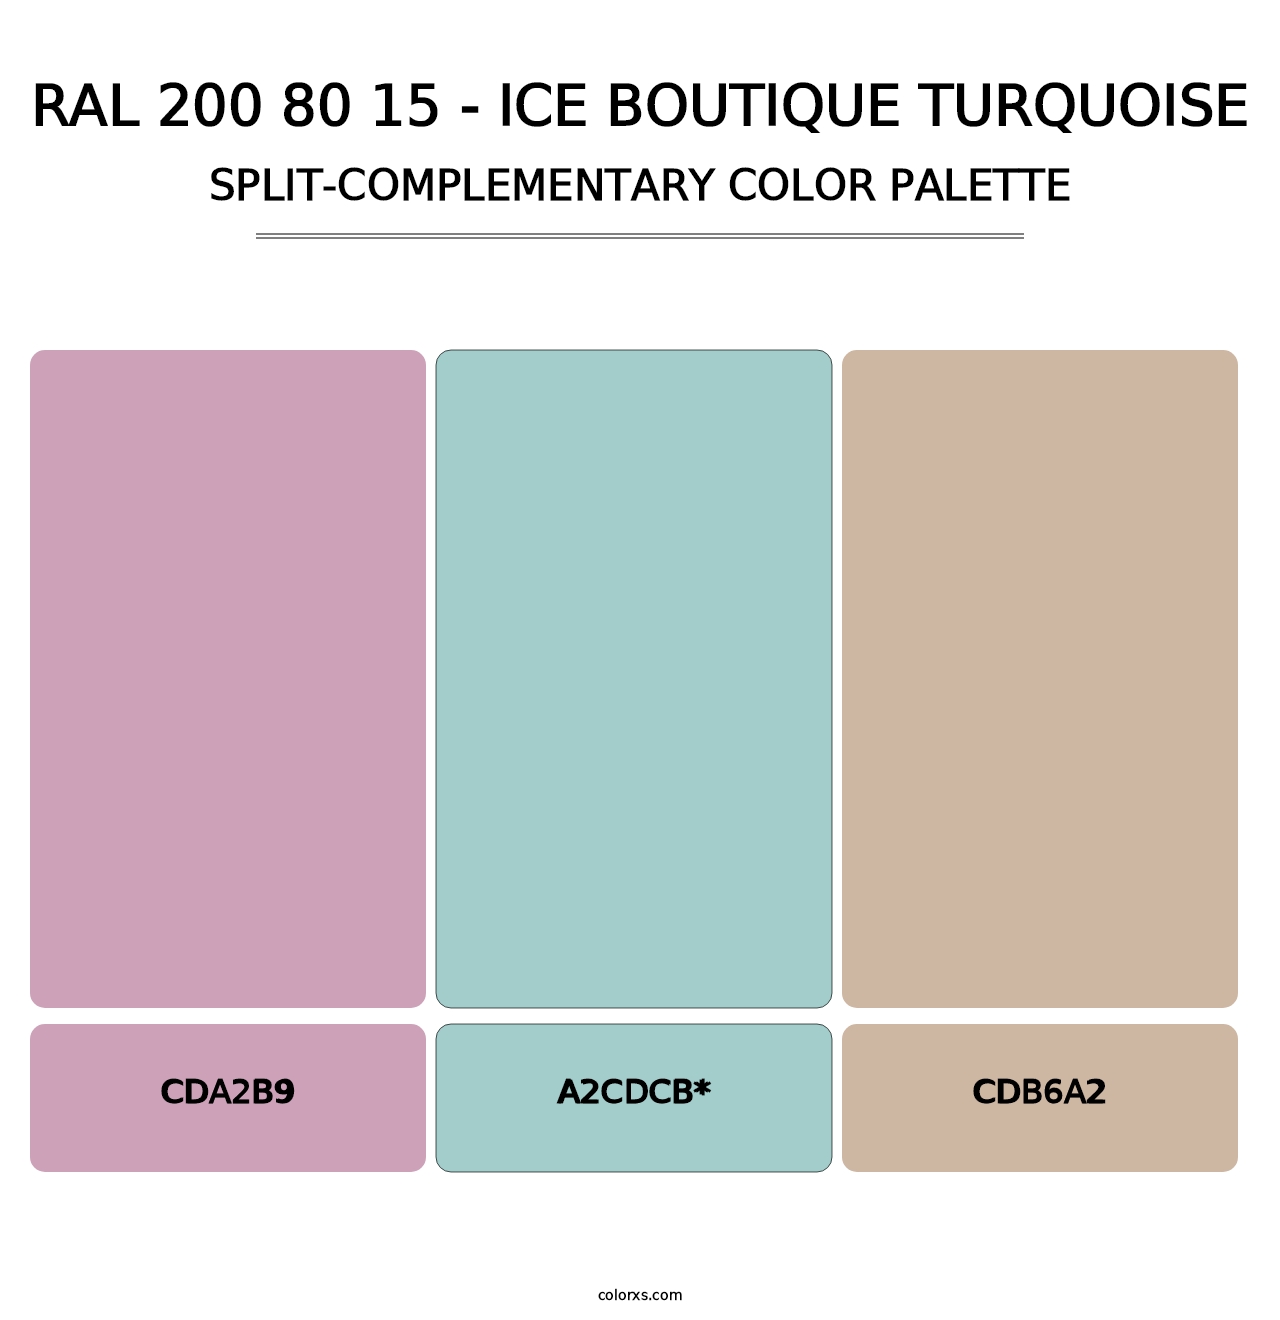 RAL 200 80 15 - Ice Boutique Turquoise - Split-Complementary Color Palette